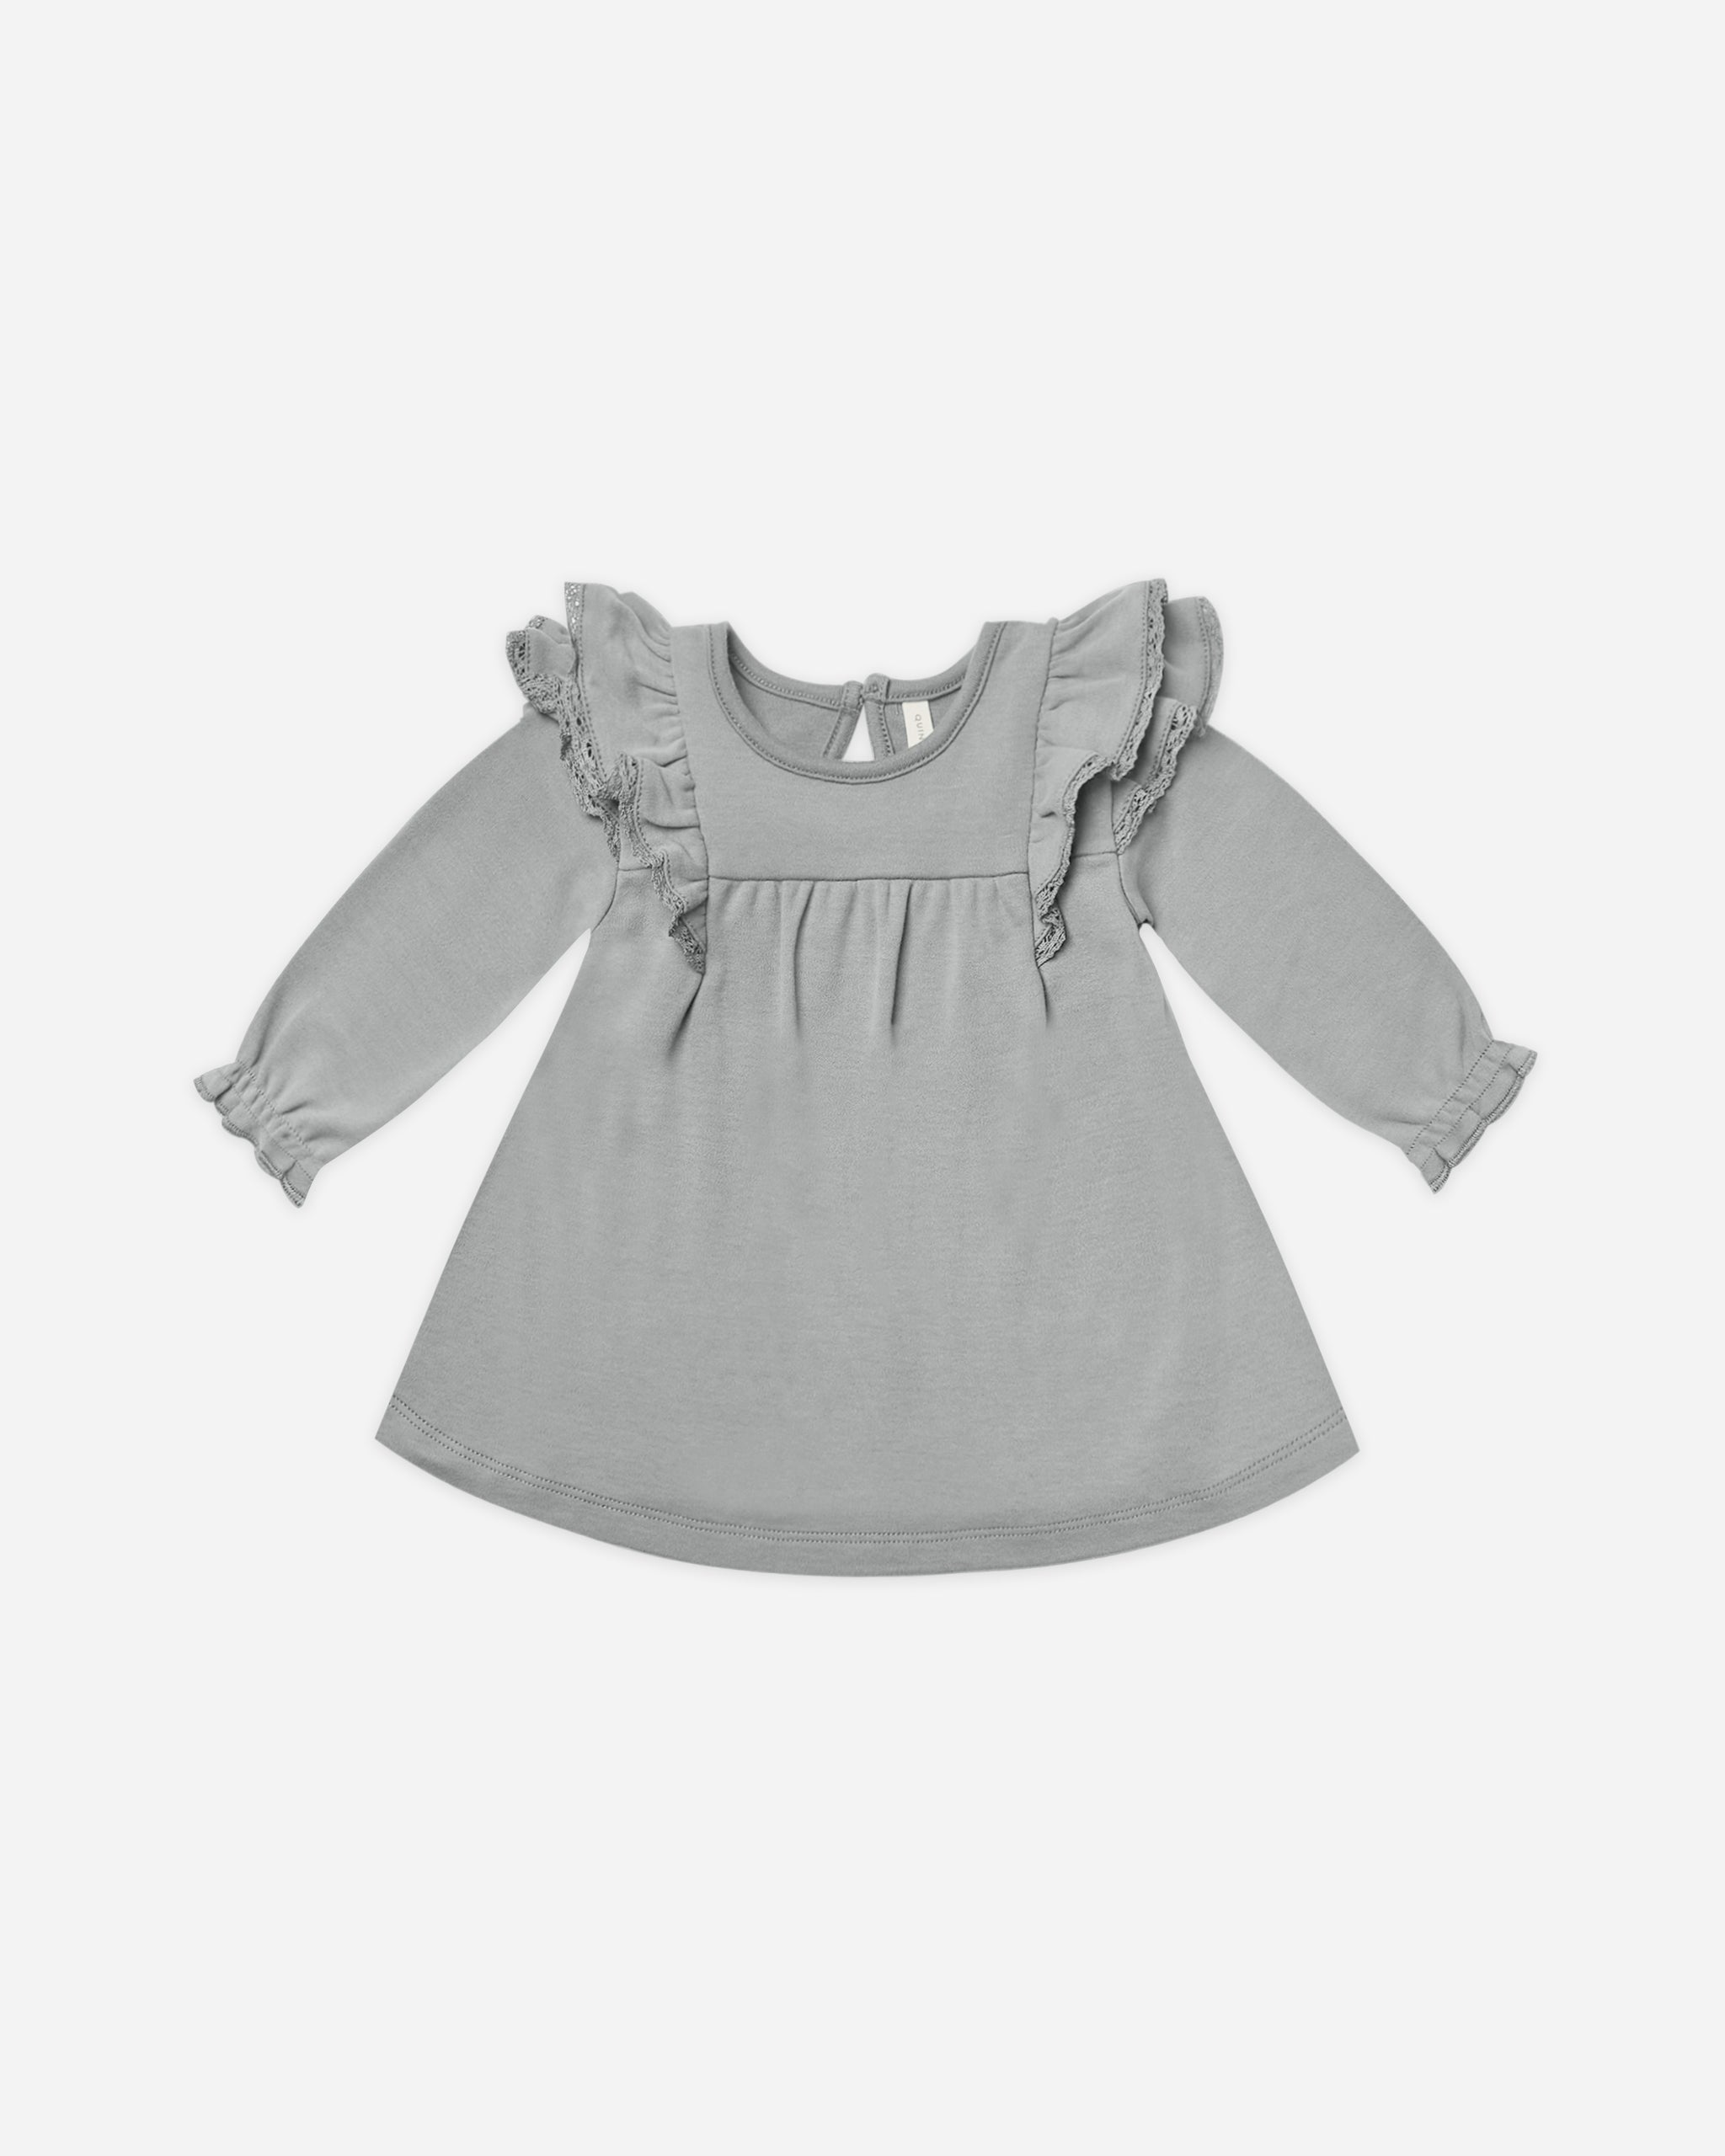 Long Sleeve Flutter Dress || Dusty Blue - Rylee + Cru | Kids Clothes | Trendy Baby Clothes | Modern Infant Outfits |